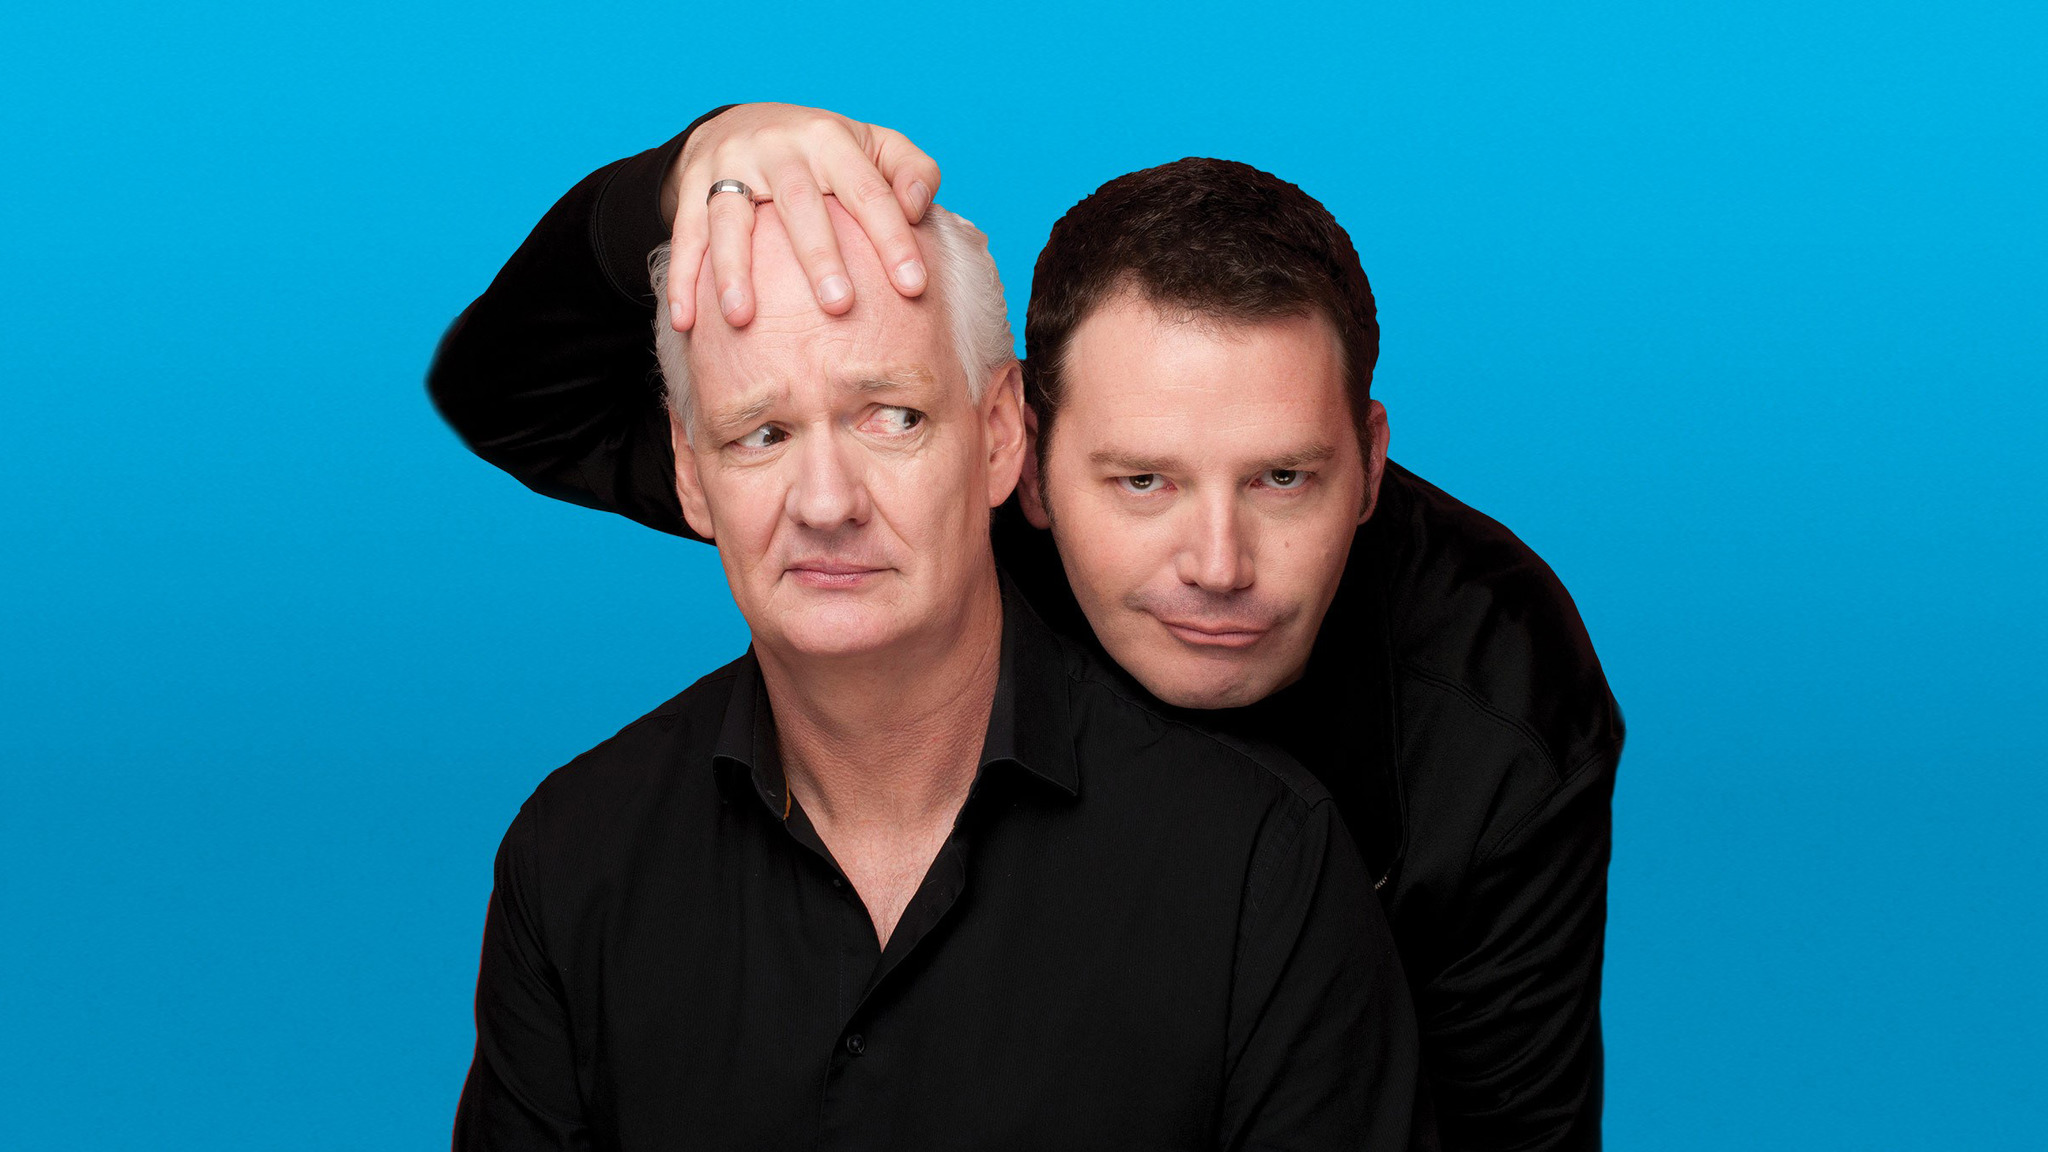 Colin Mochrie & Brad Sherwood Tickets Event Dates & Schedule